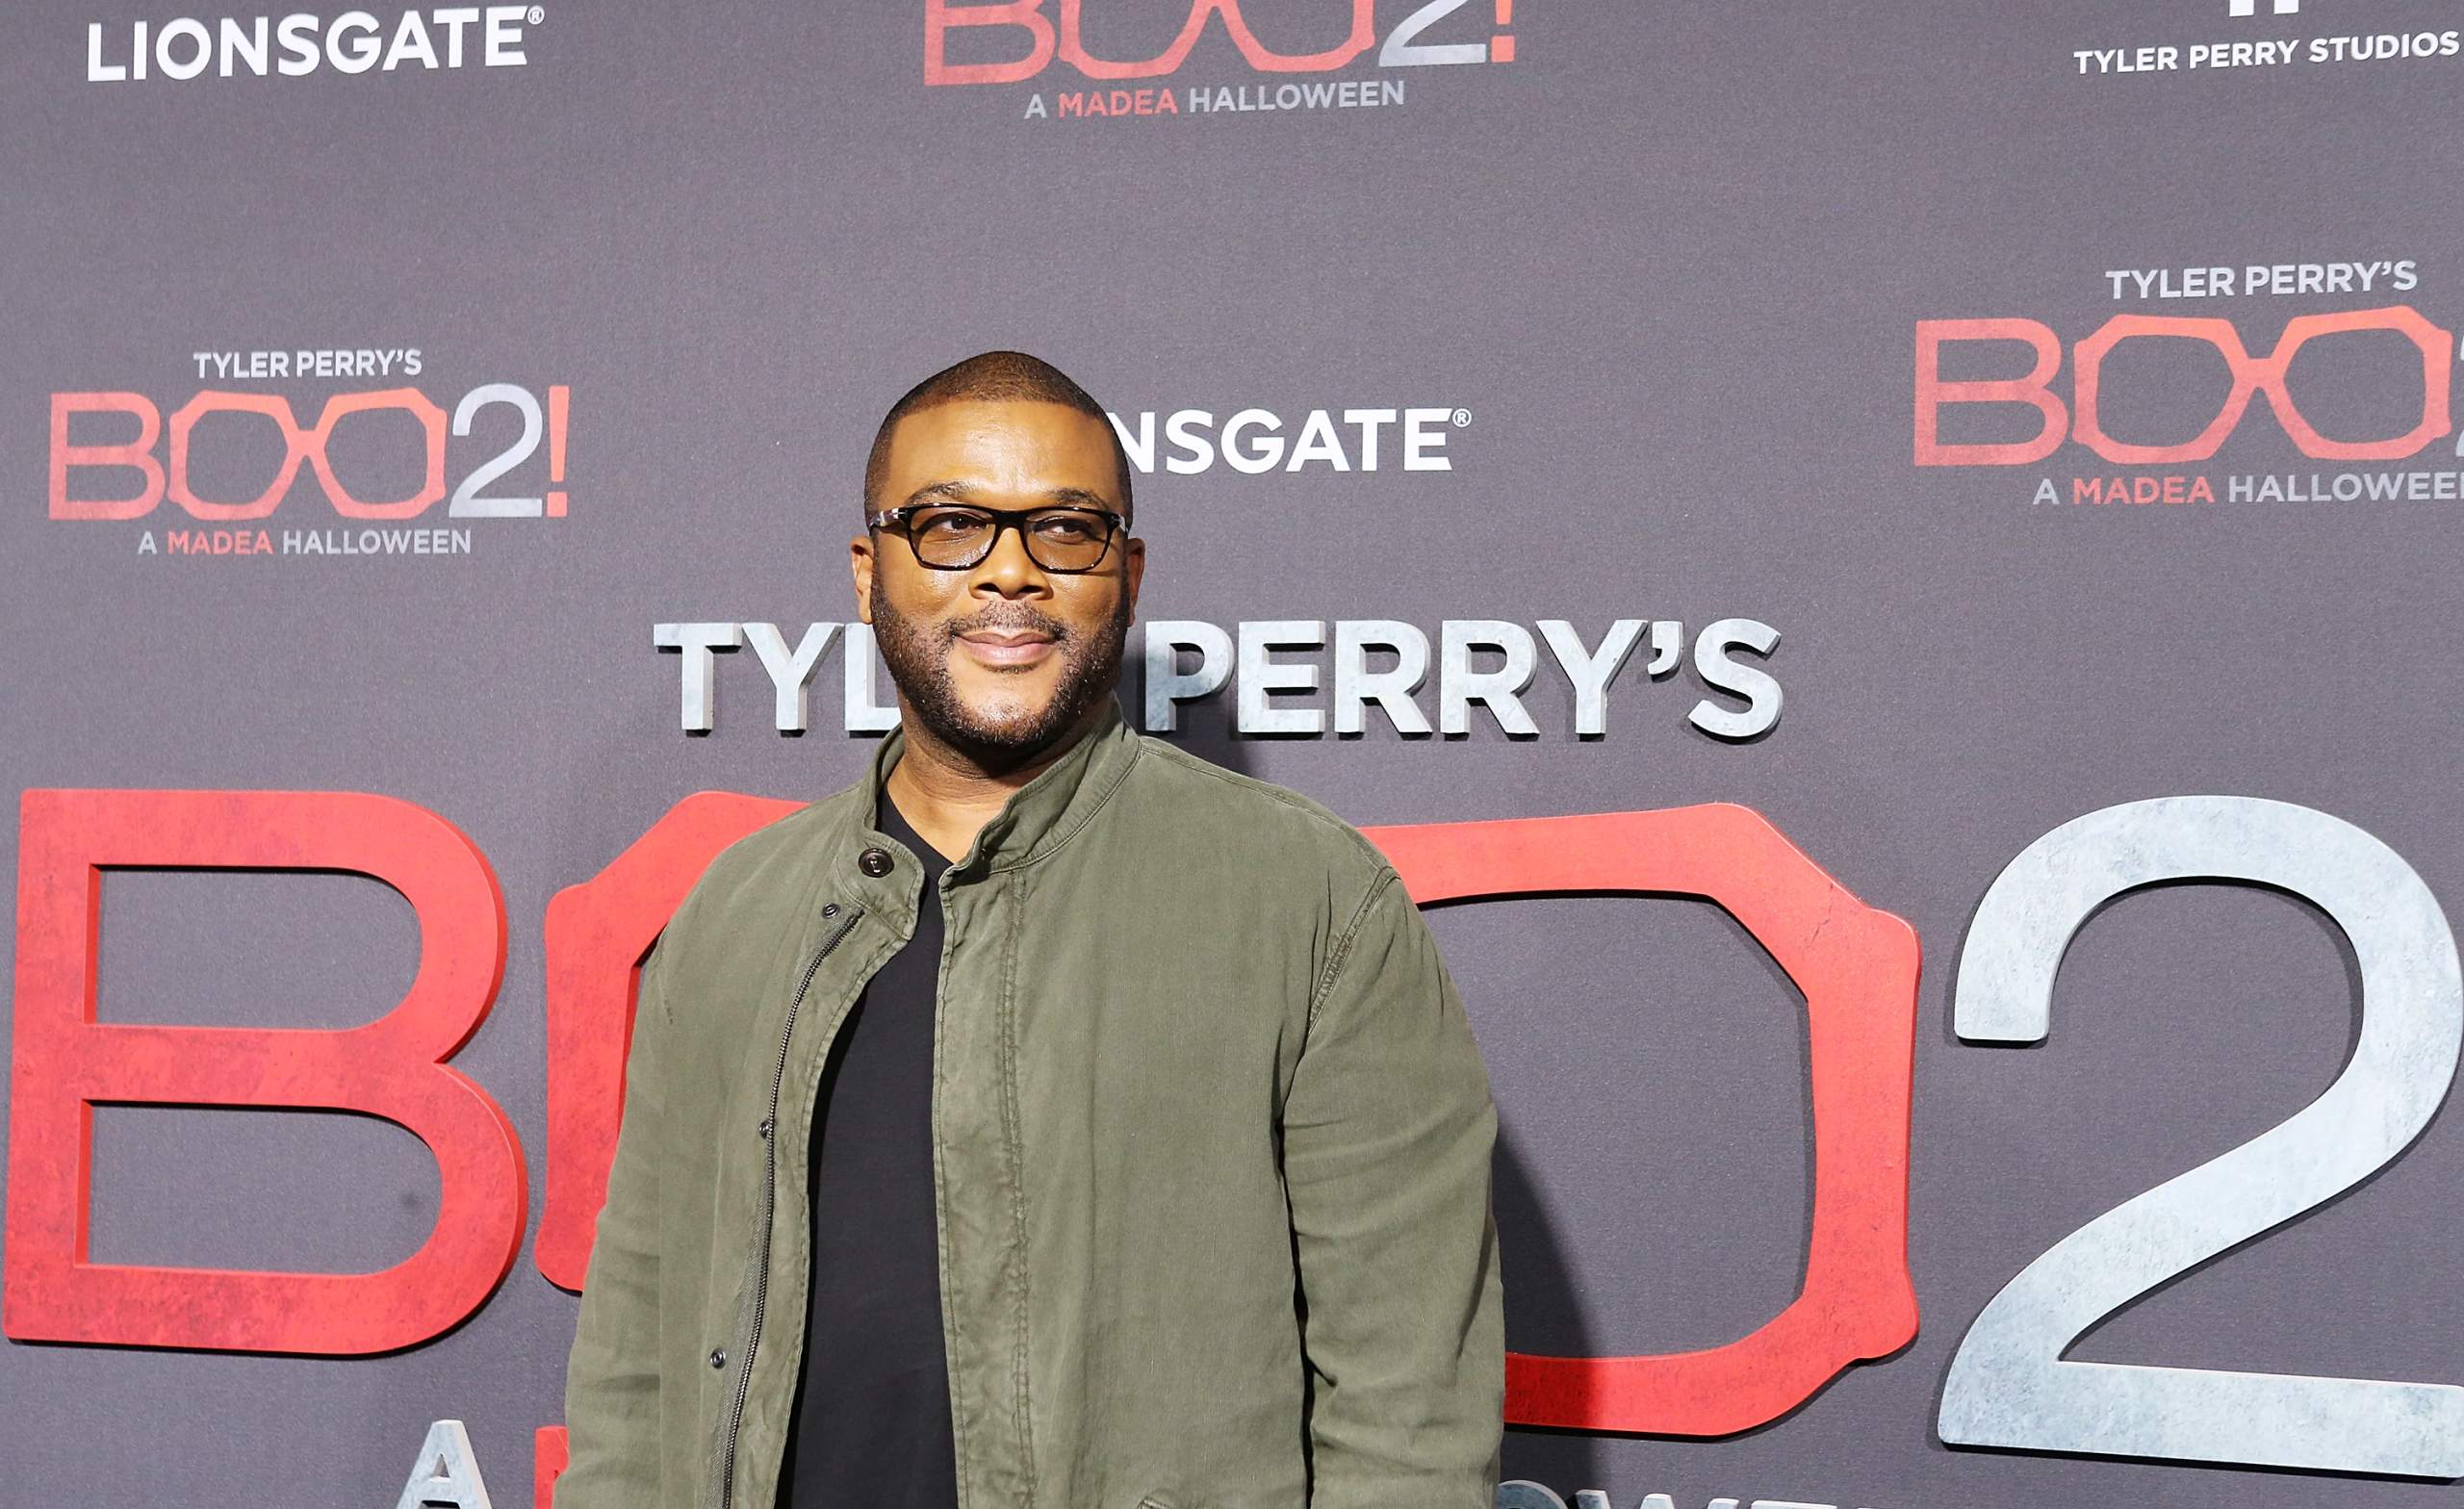 <br> <br> <strong>Rotten Tomatoes Grade: 5%</strong> <br> <br> Tyler Perry is a unique filmmaker. His content is quite funny -- though it doesn't always land with audiences universally speaking. The first <em>Boo</em> film did very well at the box office. Wanting to capitalize on that monetarily speaking, a second was crafted with the same horror spoof feel. Unfortunately for Perry, the film was panned by audiences and critics alike.